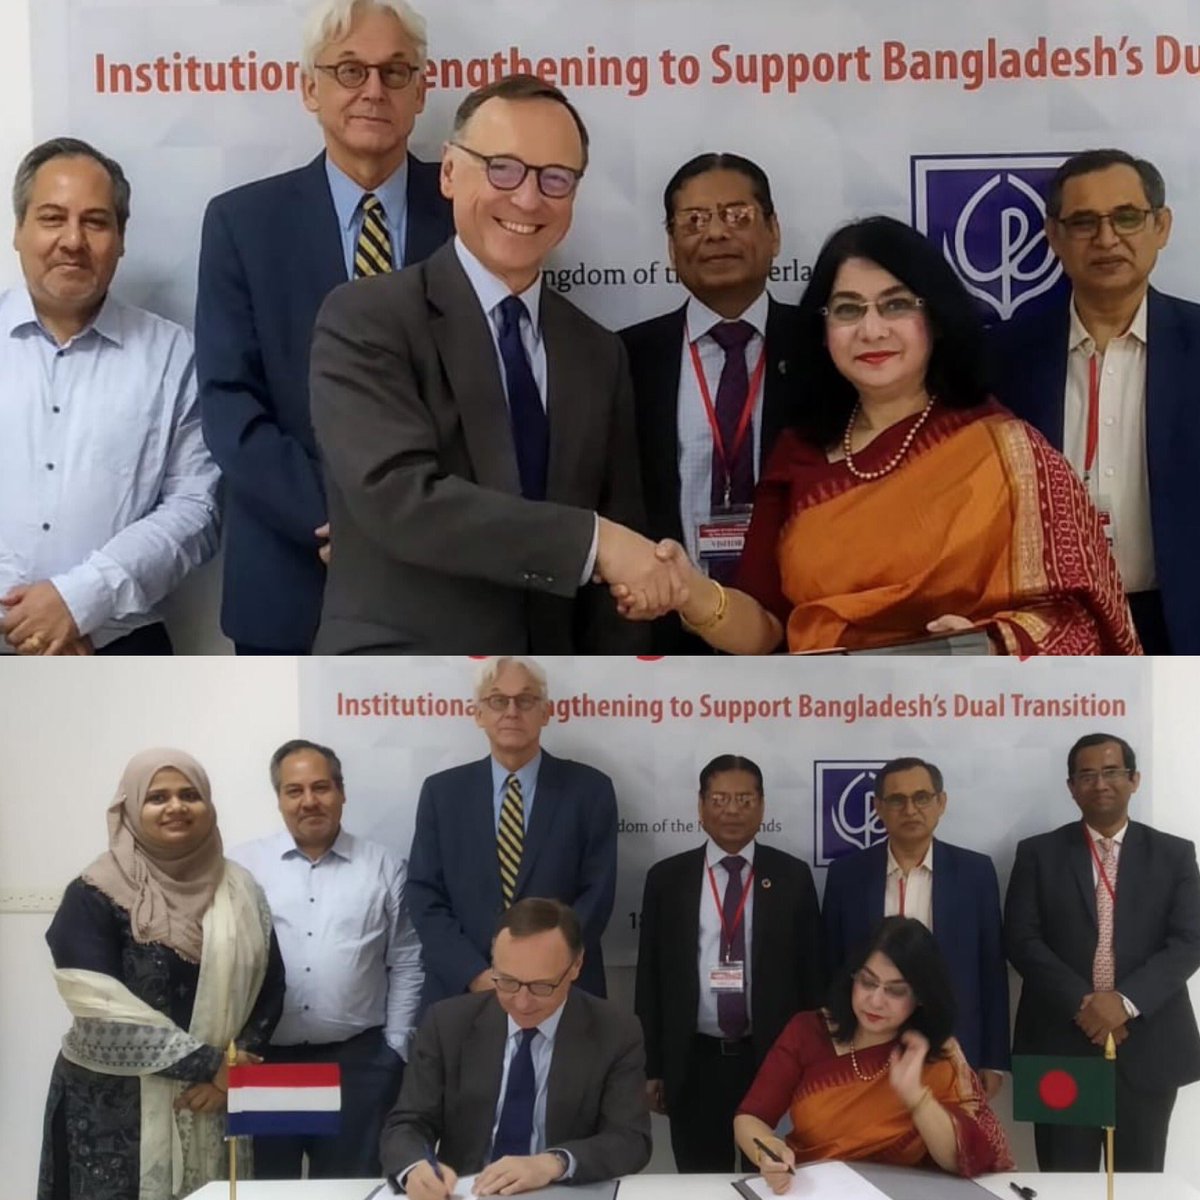 Pleased to sign off on Dutch support for @cpdbd . 🇳🇱 NL and 🇩🇰 DK join hands. Independent contributions to dialogue and critical policy research are vital for 🇧🇩 to become a MIC.  @FahmidaKcpd @DebapriyaBh @MustafizurRh to @cpdbd  @FahmidaKcpd @DebapriyaBh @MustafizurRh @DKAmbBD